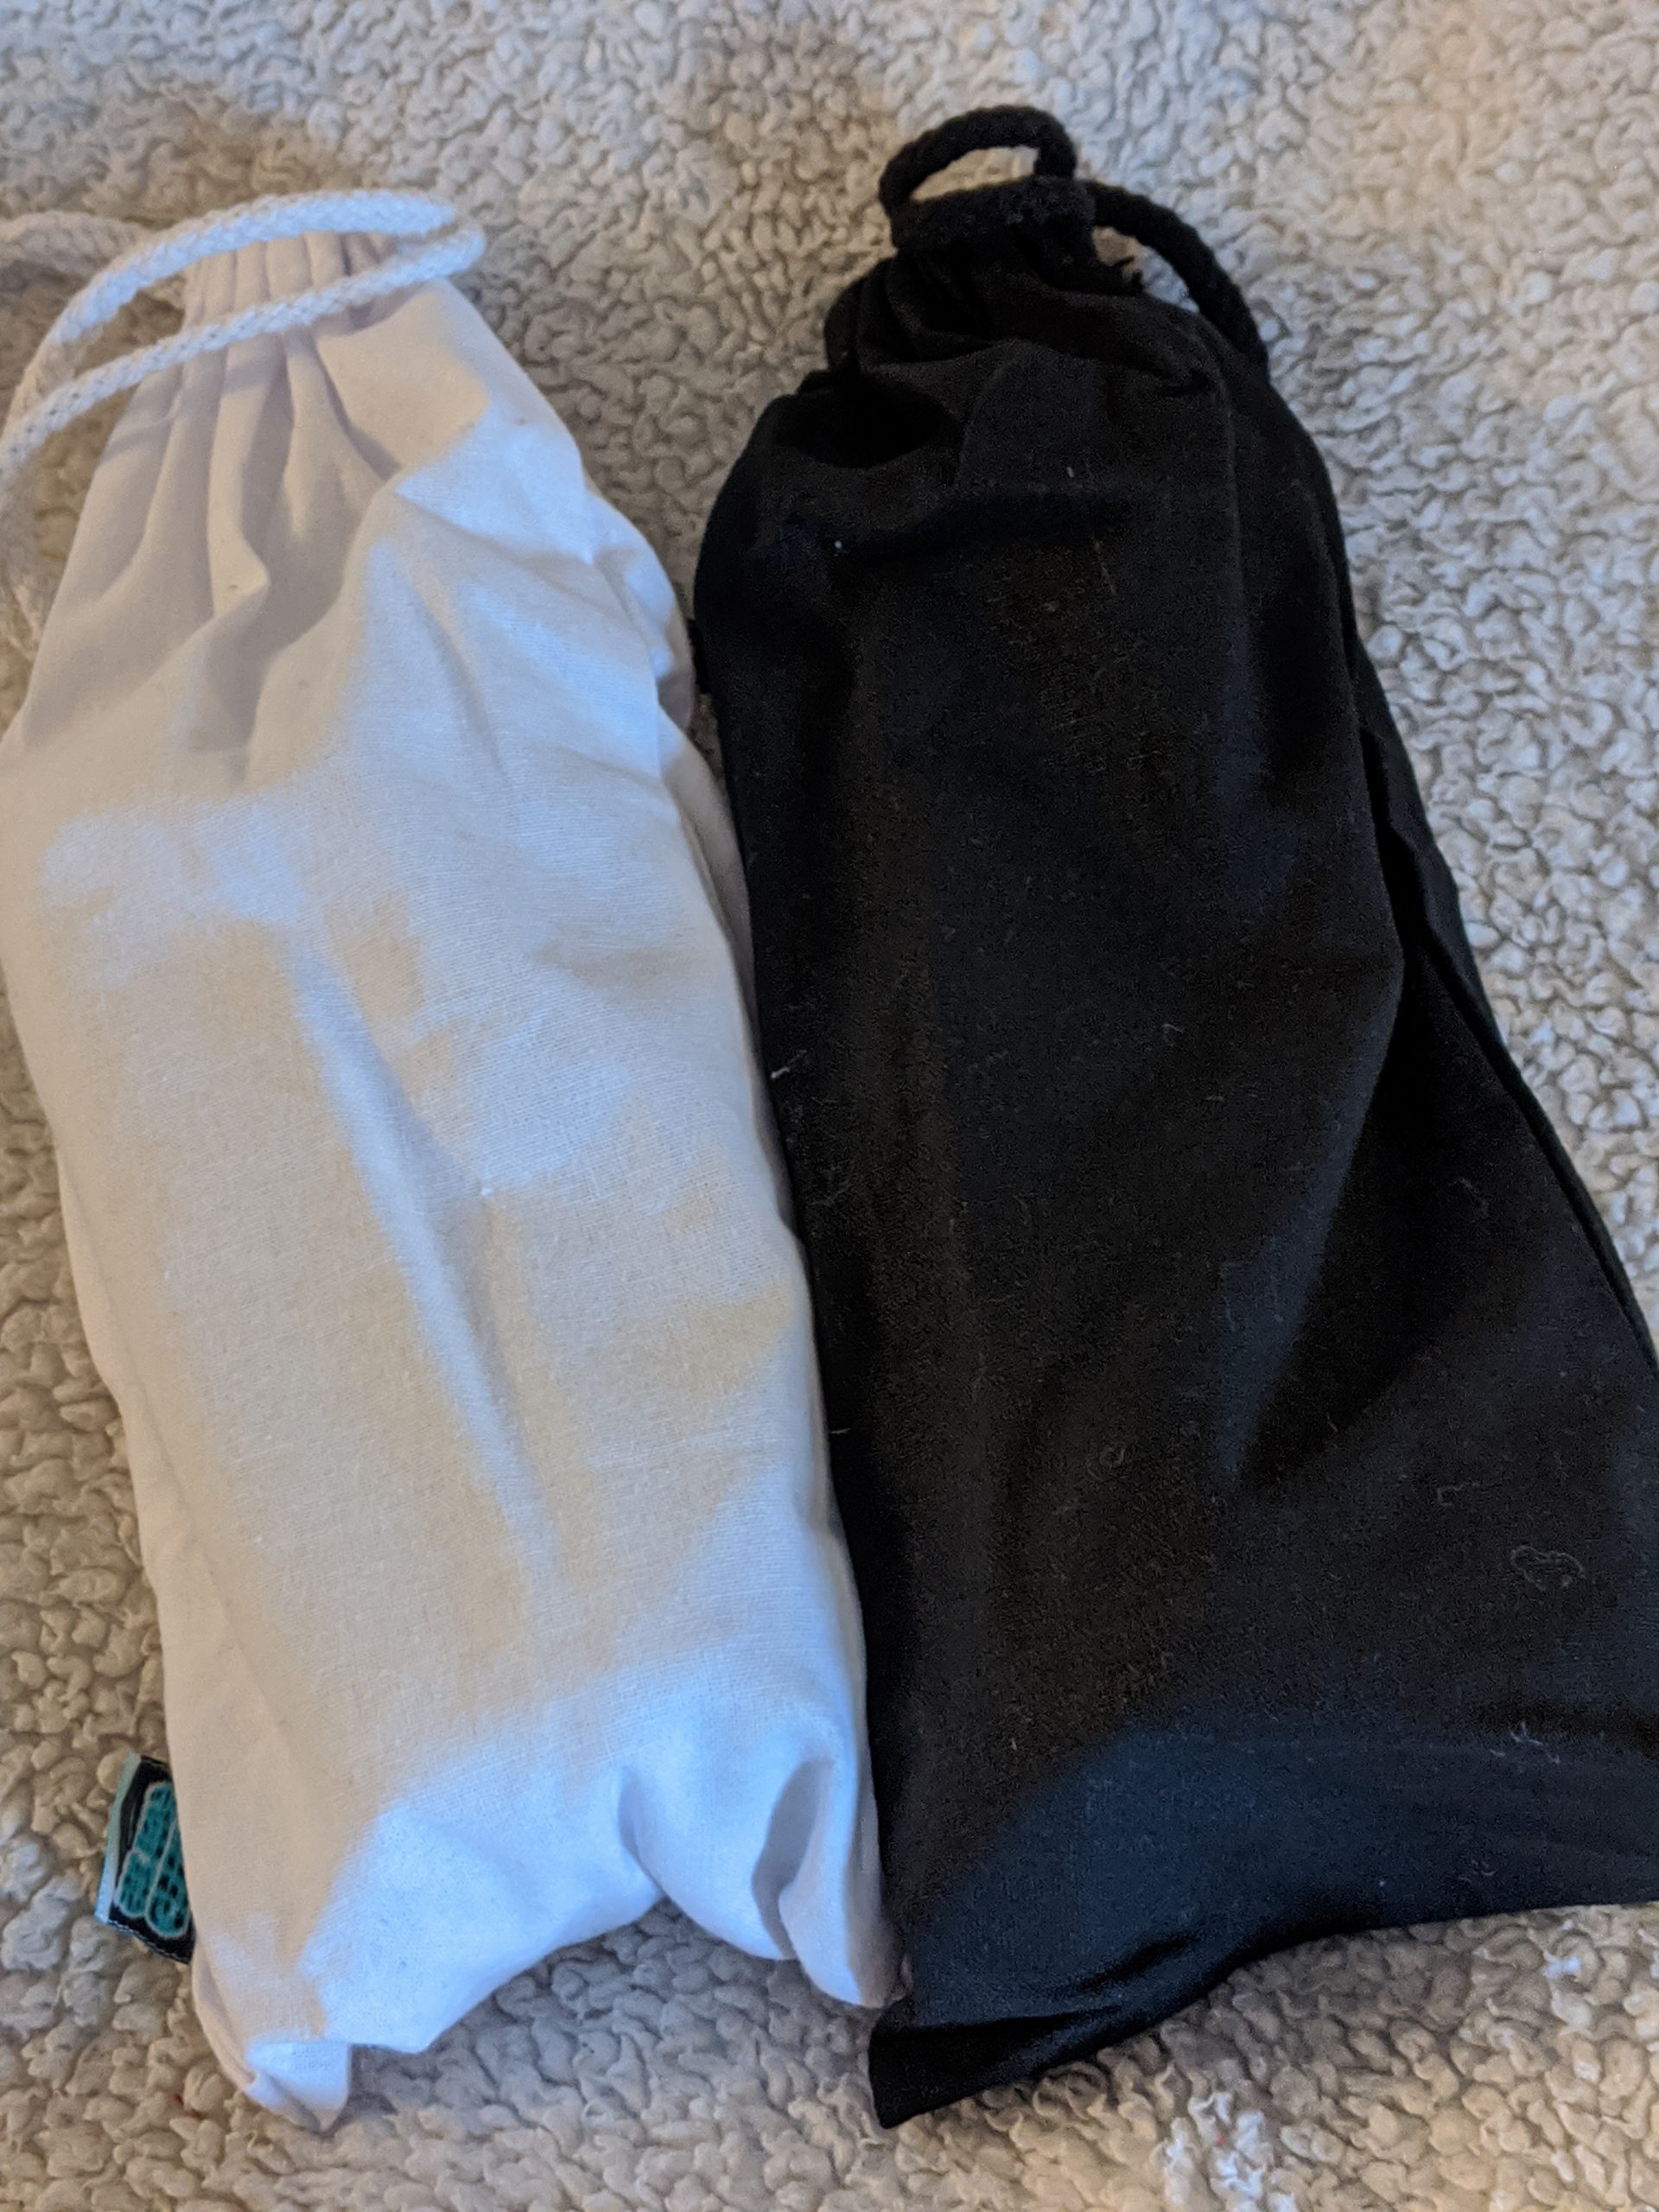 Sex toys in bags